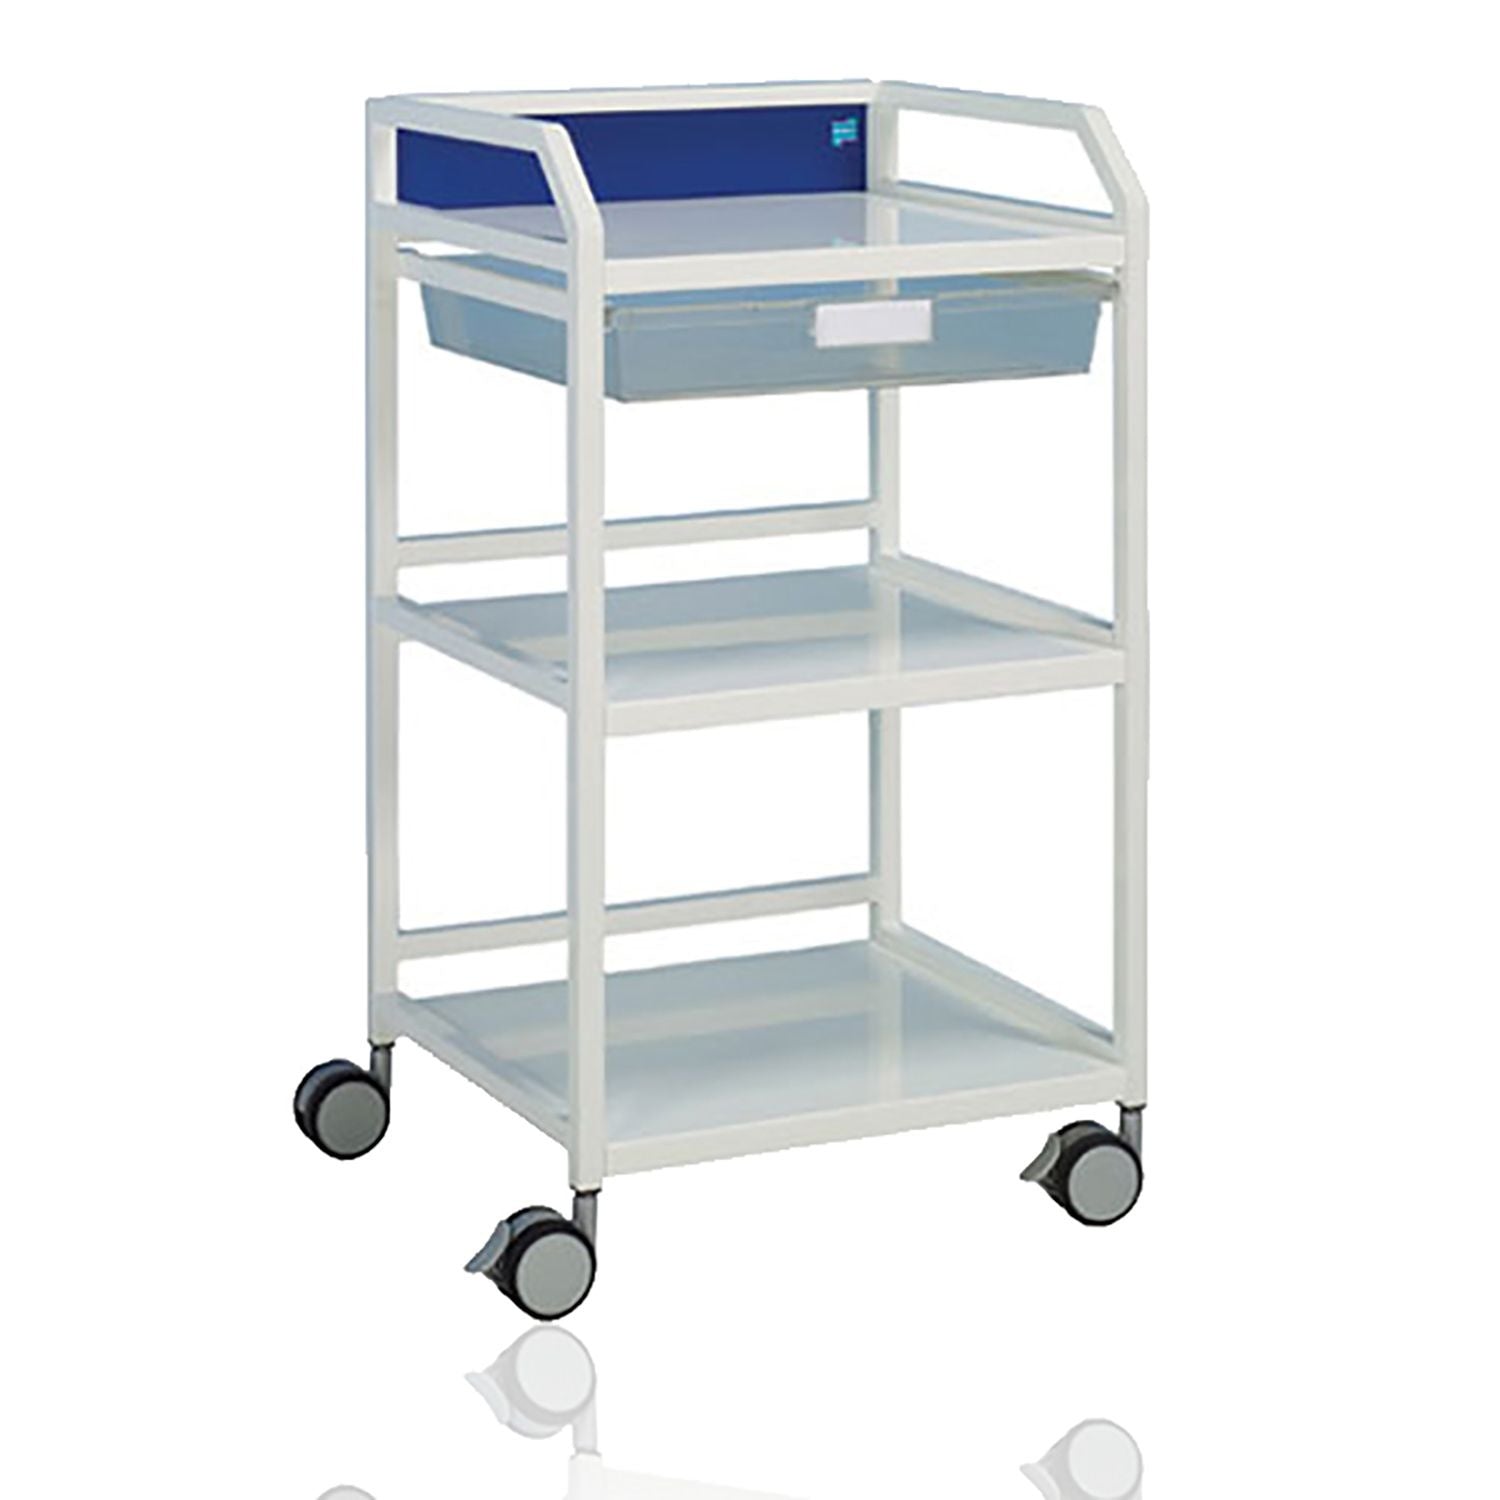 Howarth 4 Trolley with Aston Panels 960 x 520 x 445mm (HxWxD)